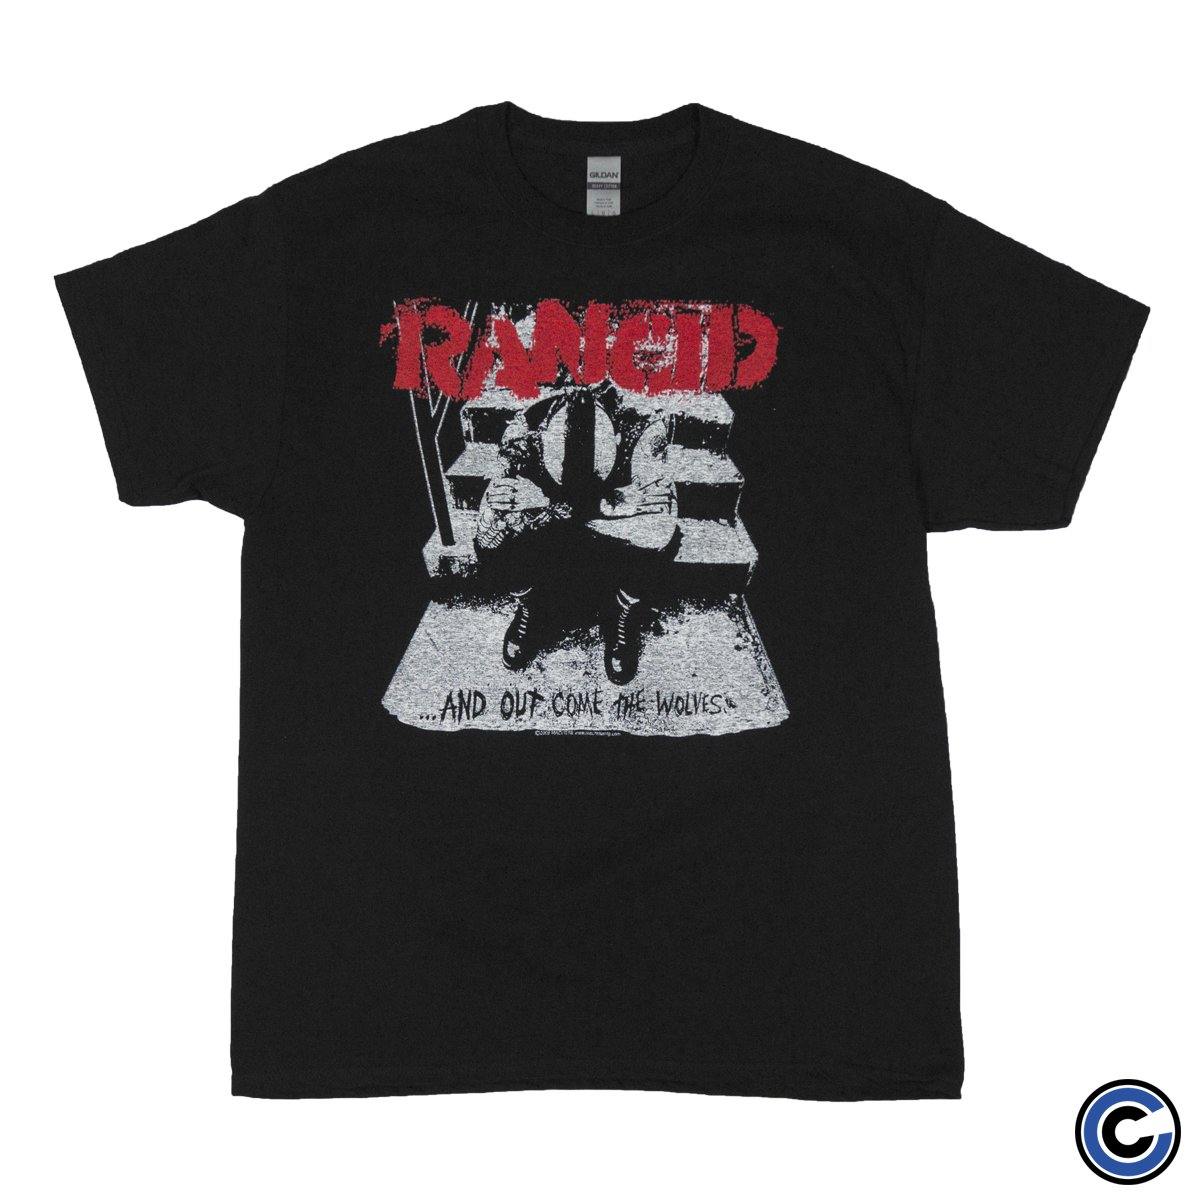 Buy – Rancid "And Out Come The Wolves" Shirt – Band & Music Merch – Cold Cuts Merch